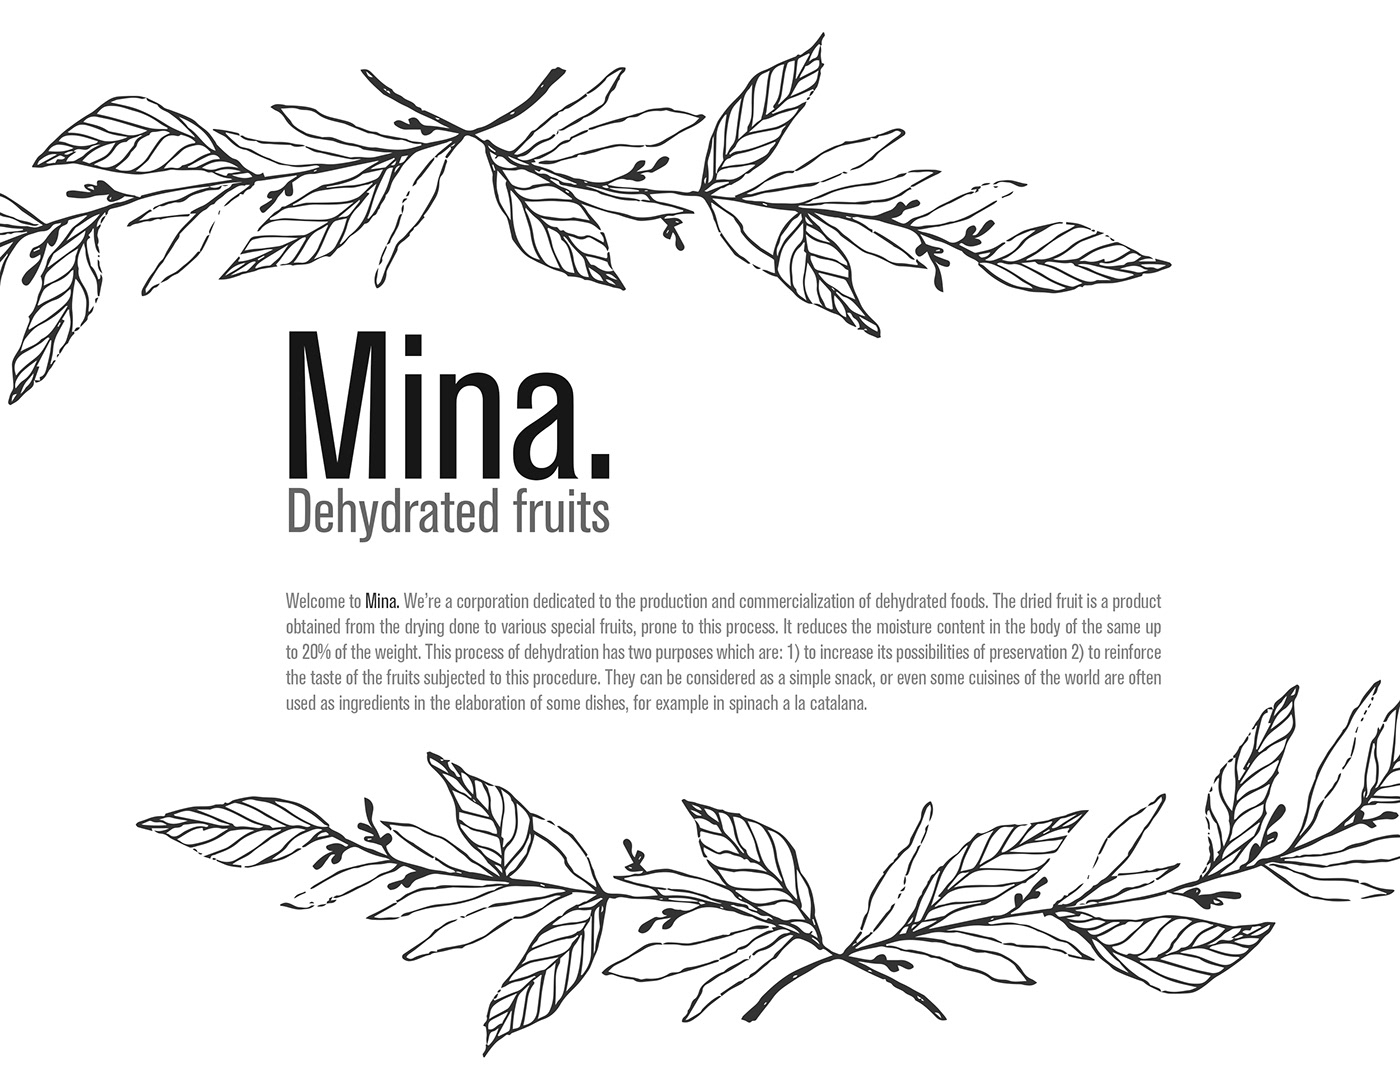 Packaging fruits brand Mina dehydrated Intpiece design product graphic jar